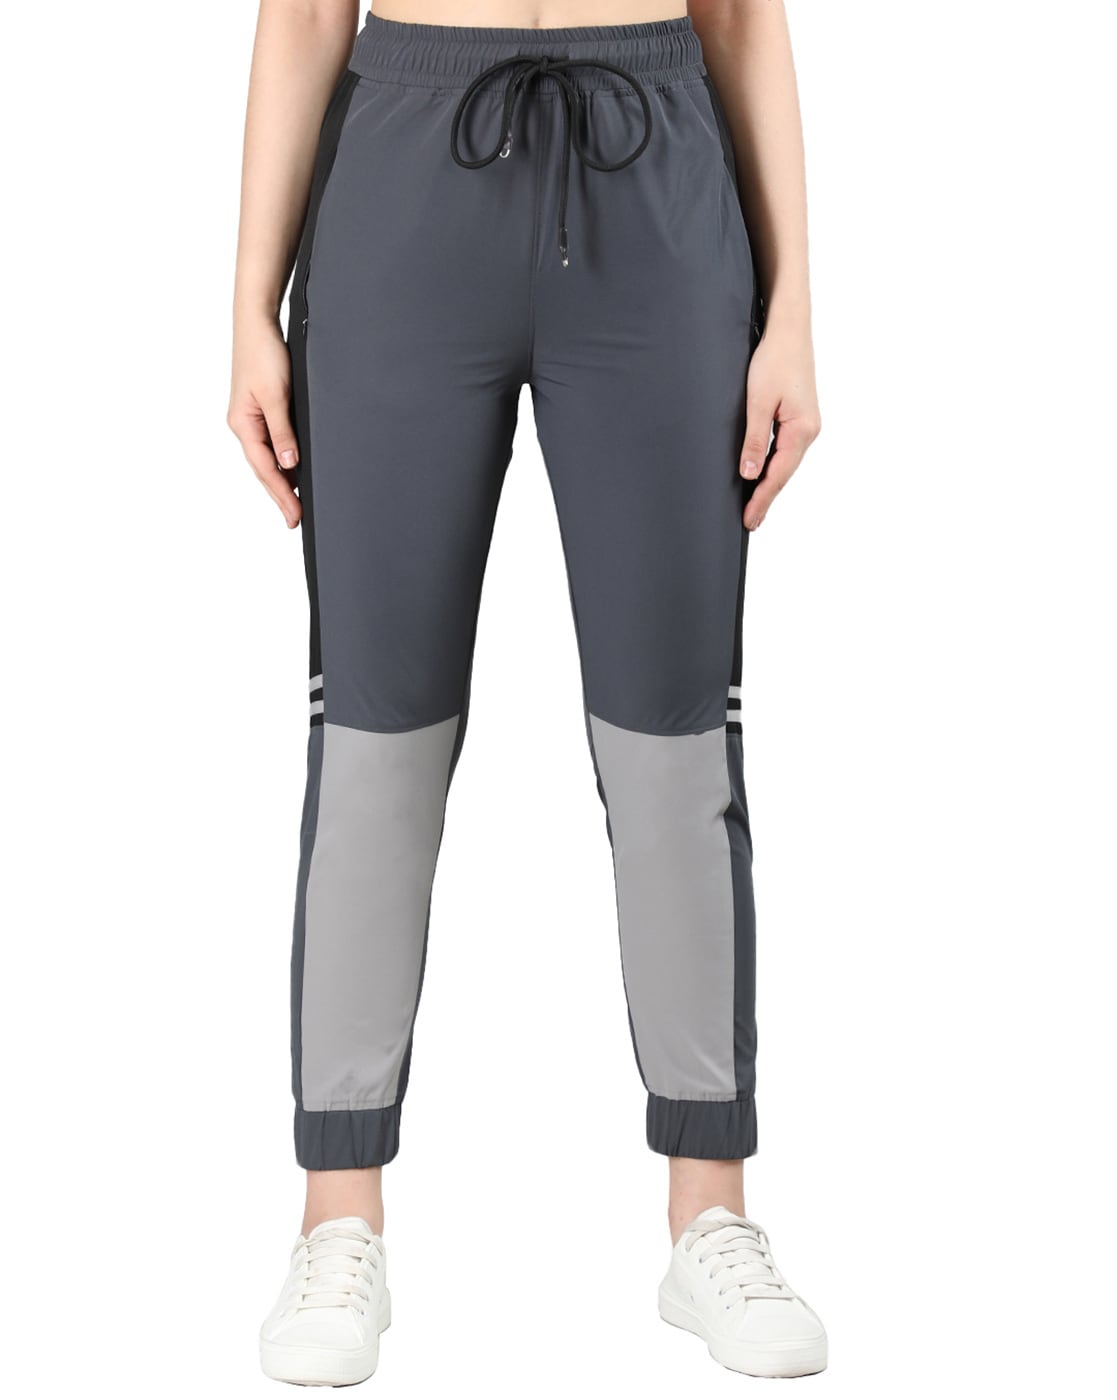 Buy Grey Track Pants for Women by CHKOKKO Online